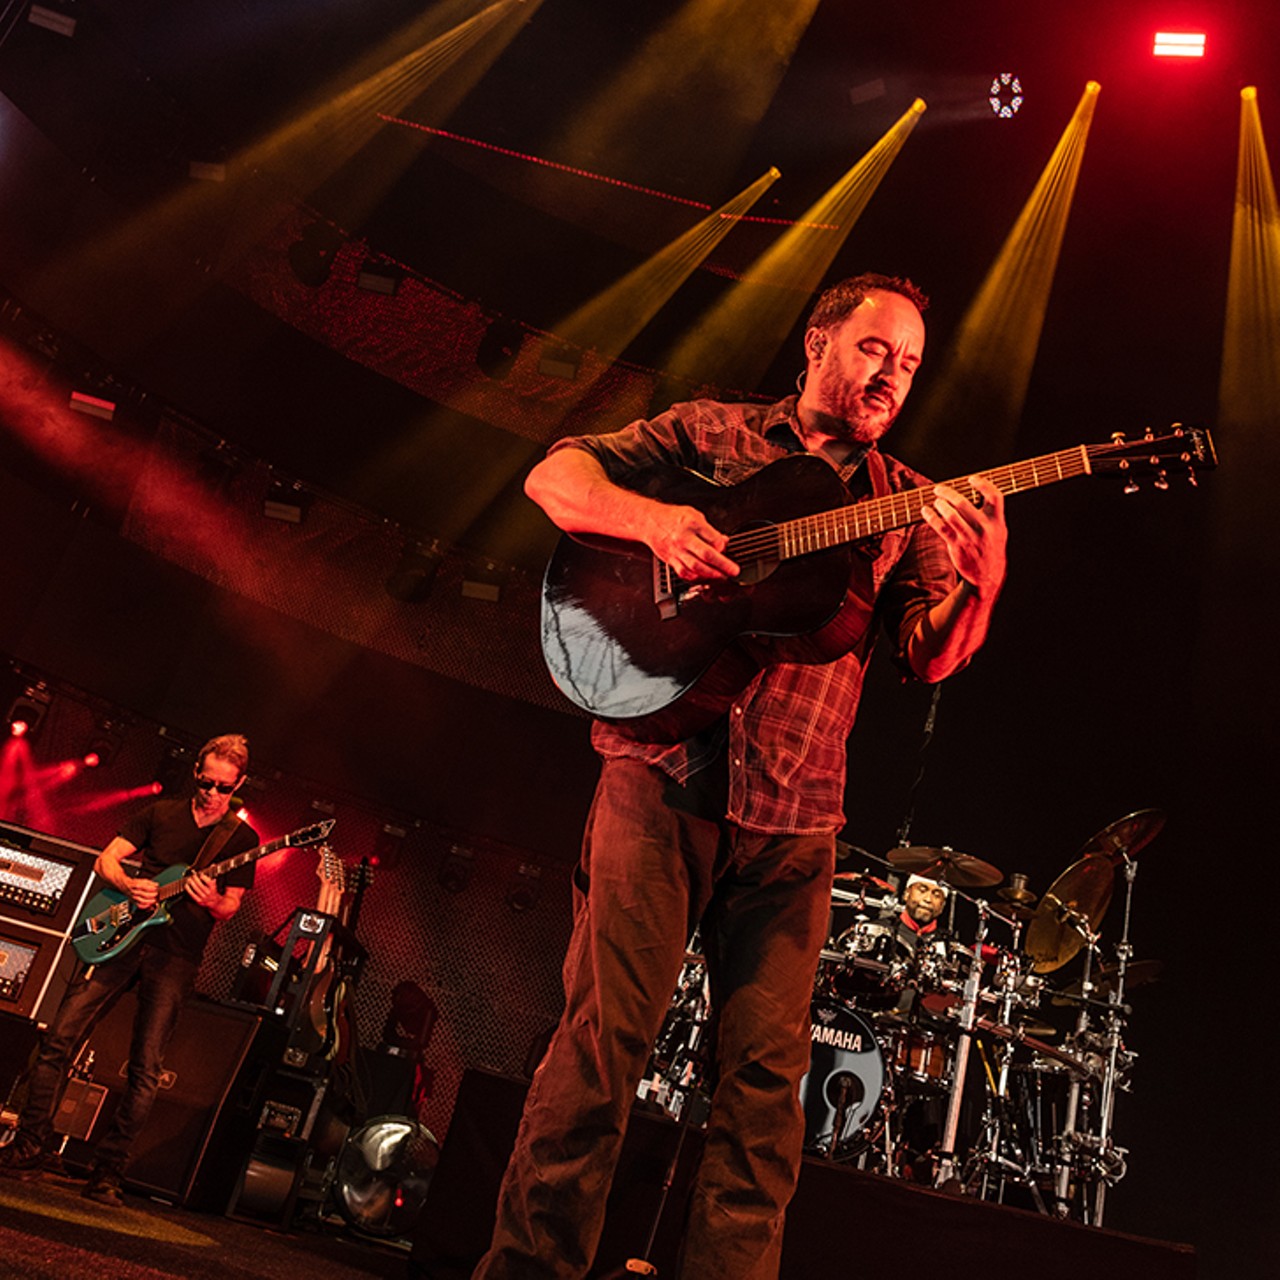 All the Photos from the Dave Matthews Band Performance at Riverbend Music Center